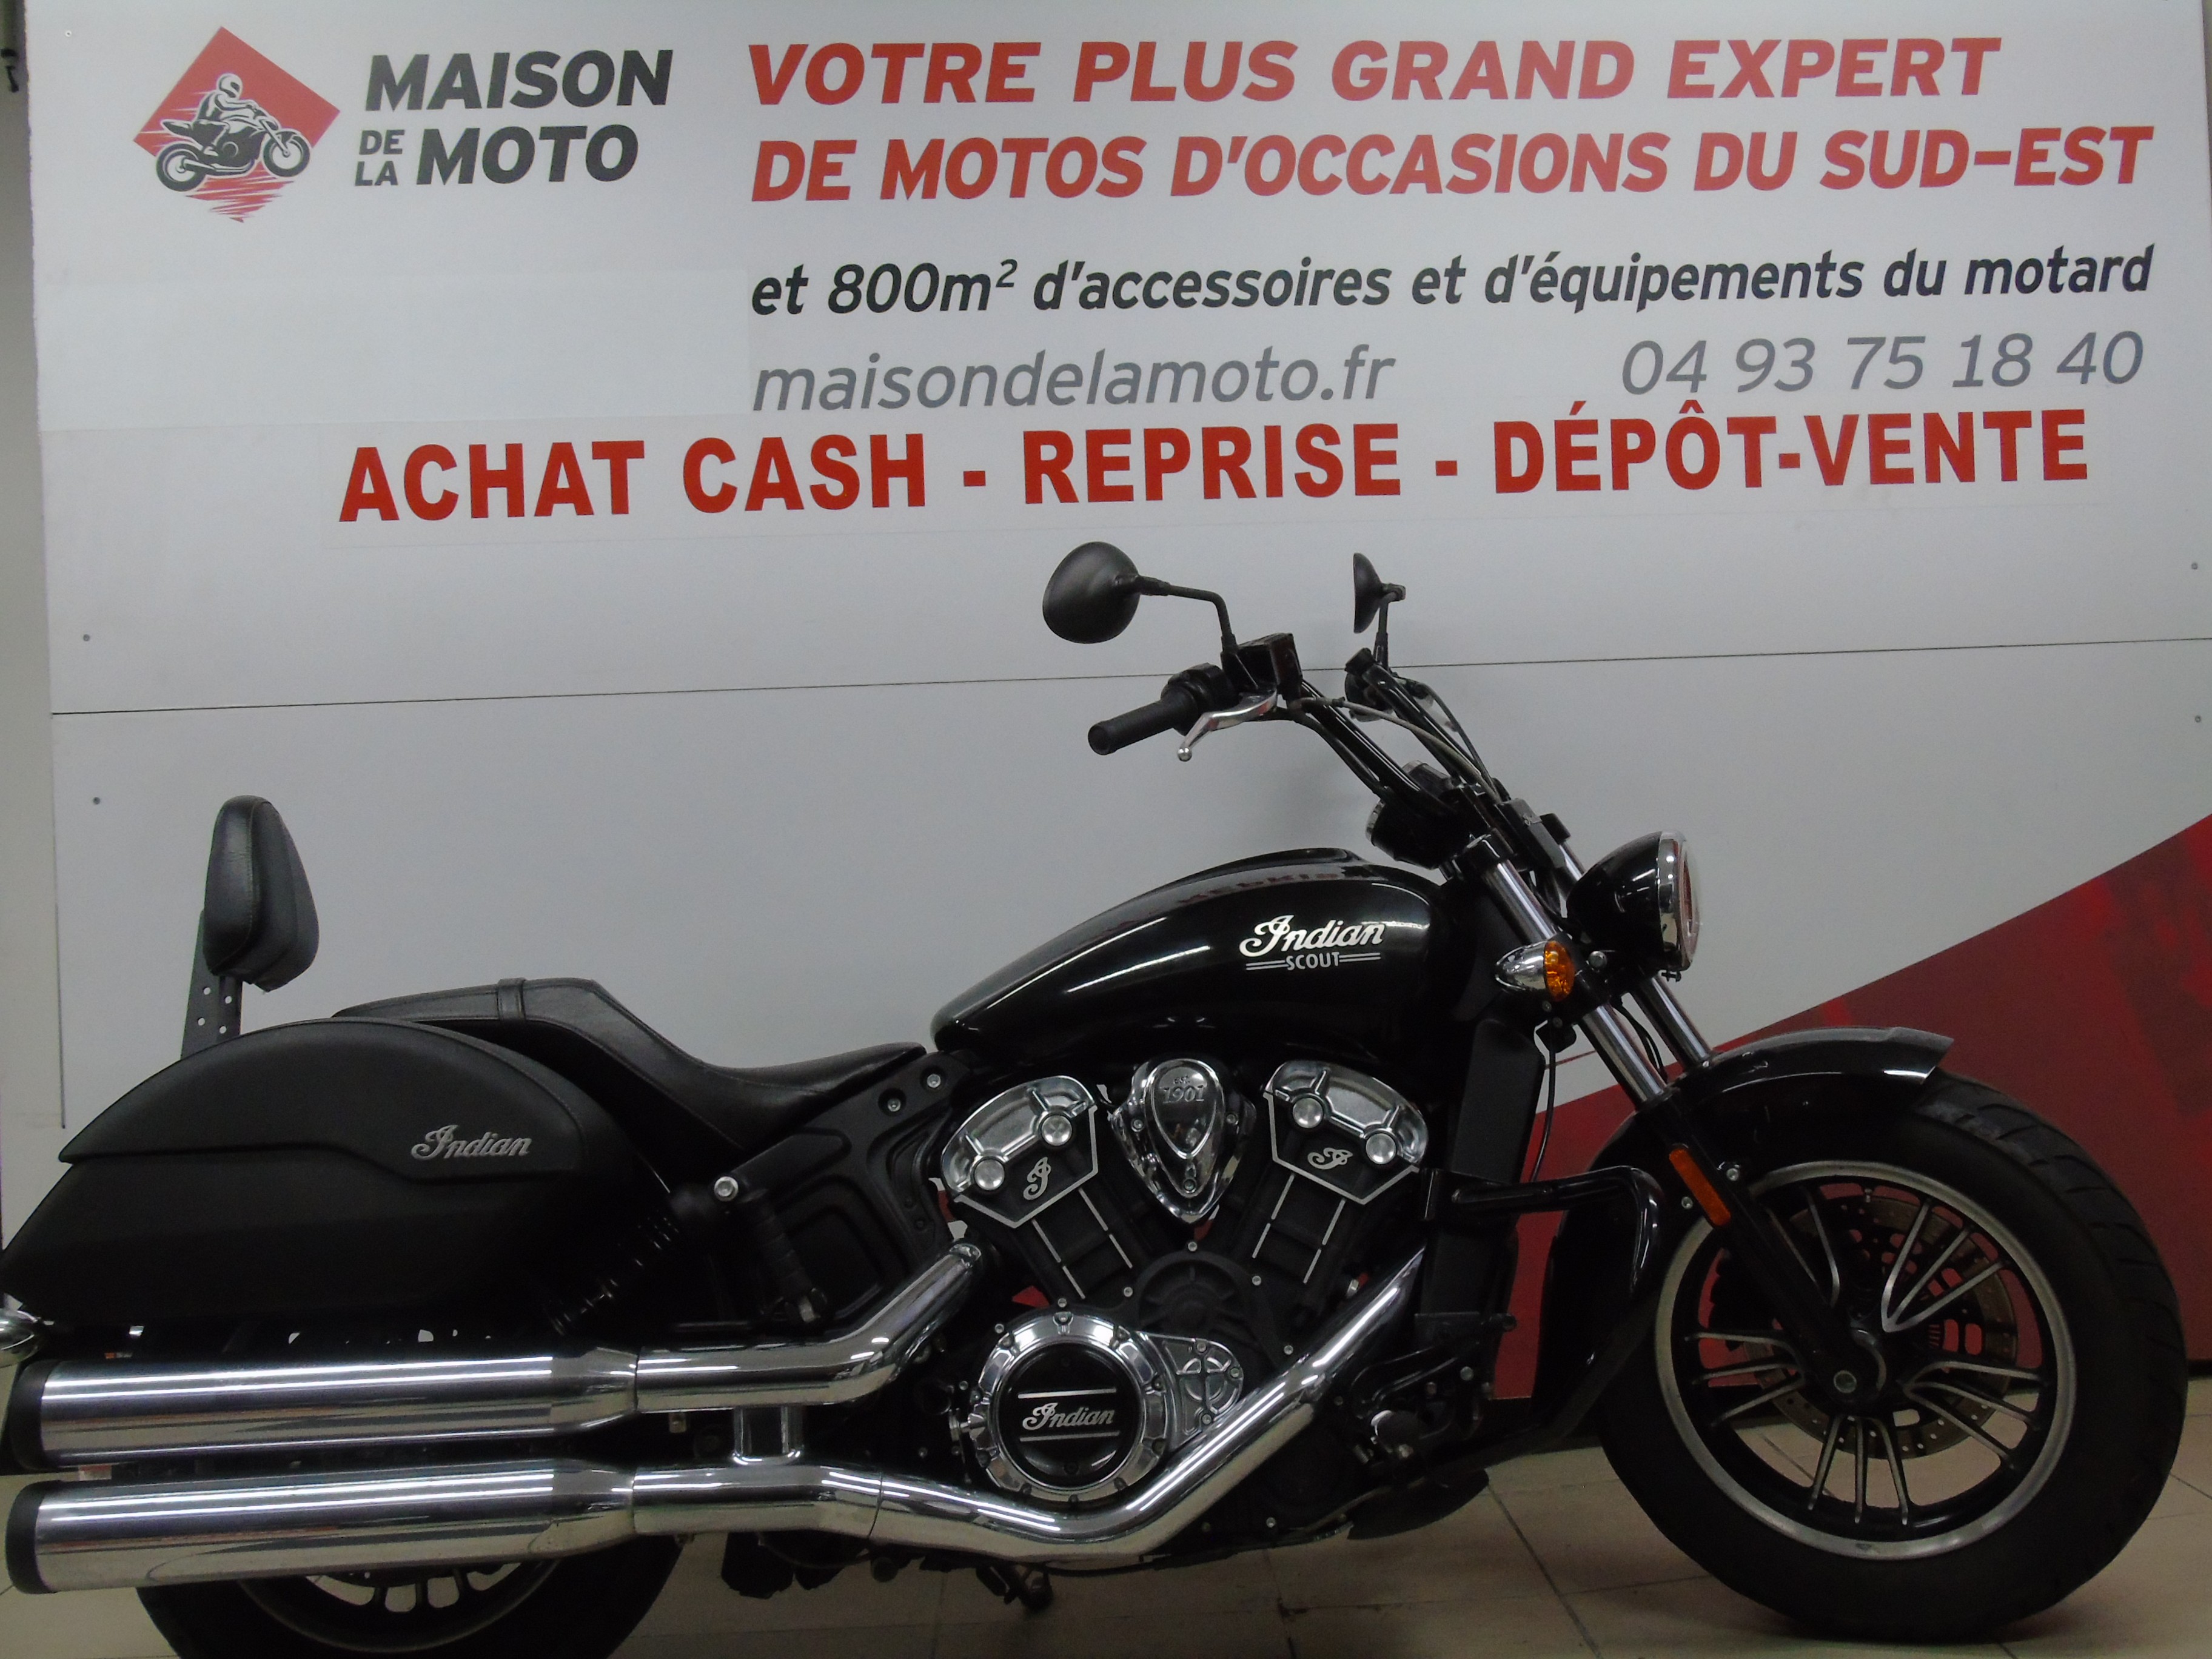 Annonce moto Indian SCOUT 1200 THUNDER BLACK BRIDE A